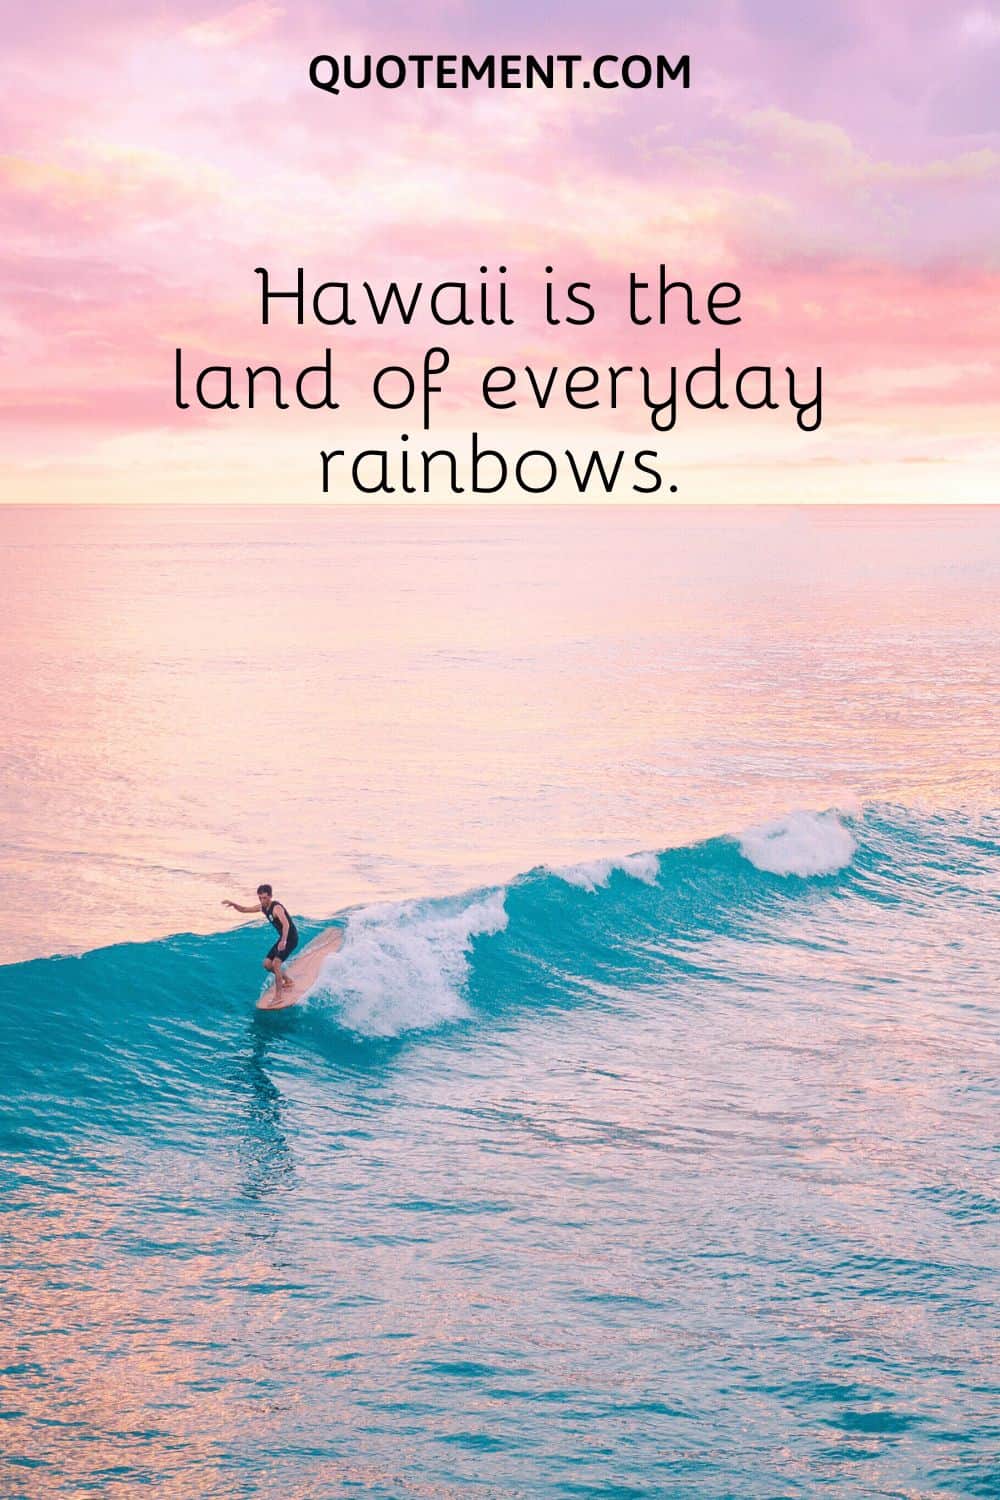 Hawaii is the land of everyday rainbows